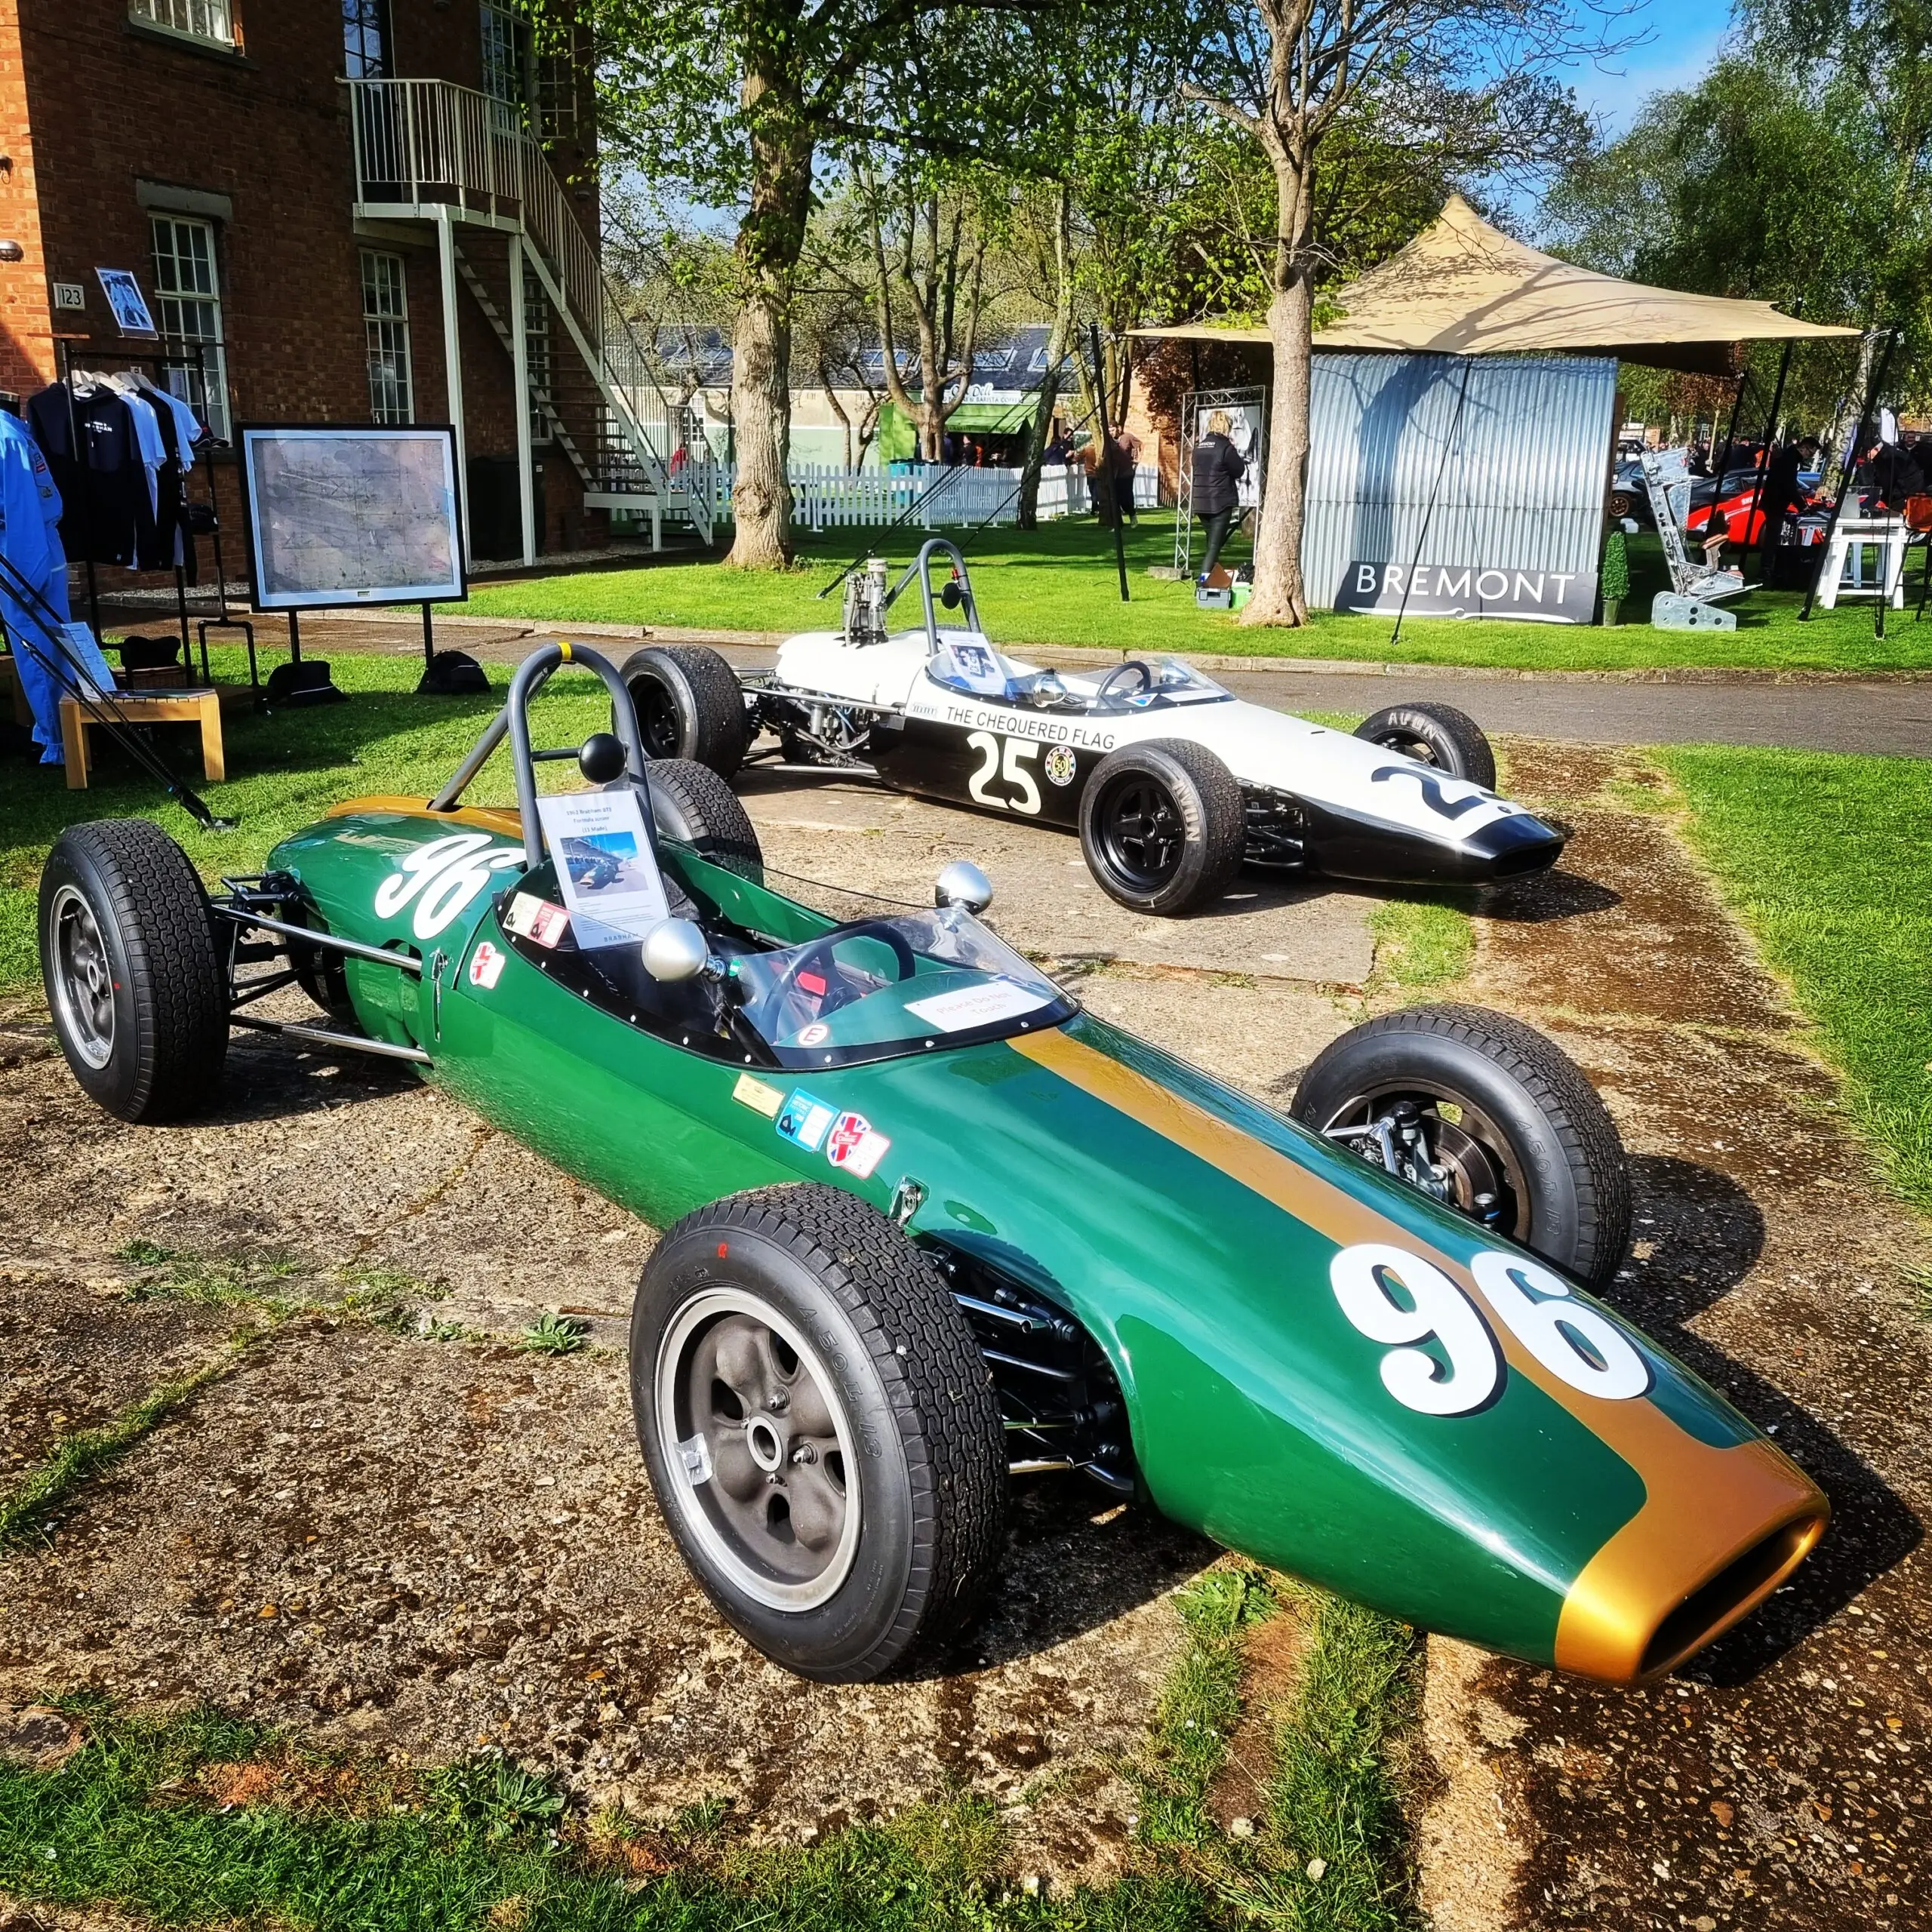 Brabham’s Formula 1 heritage celebrated on the loop lawn, as part of Bicester Heritage’s April Scramble